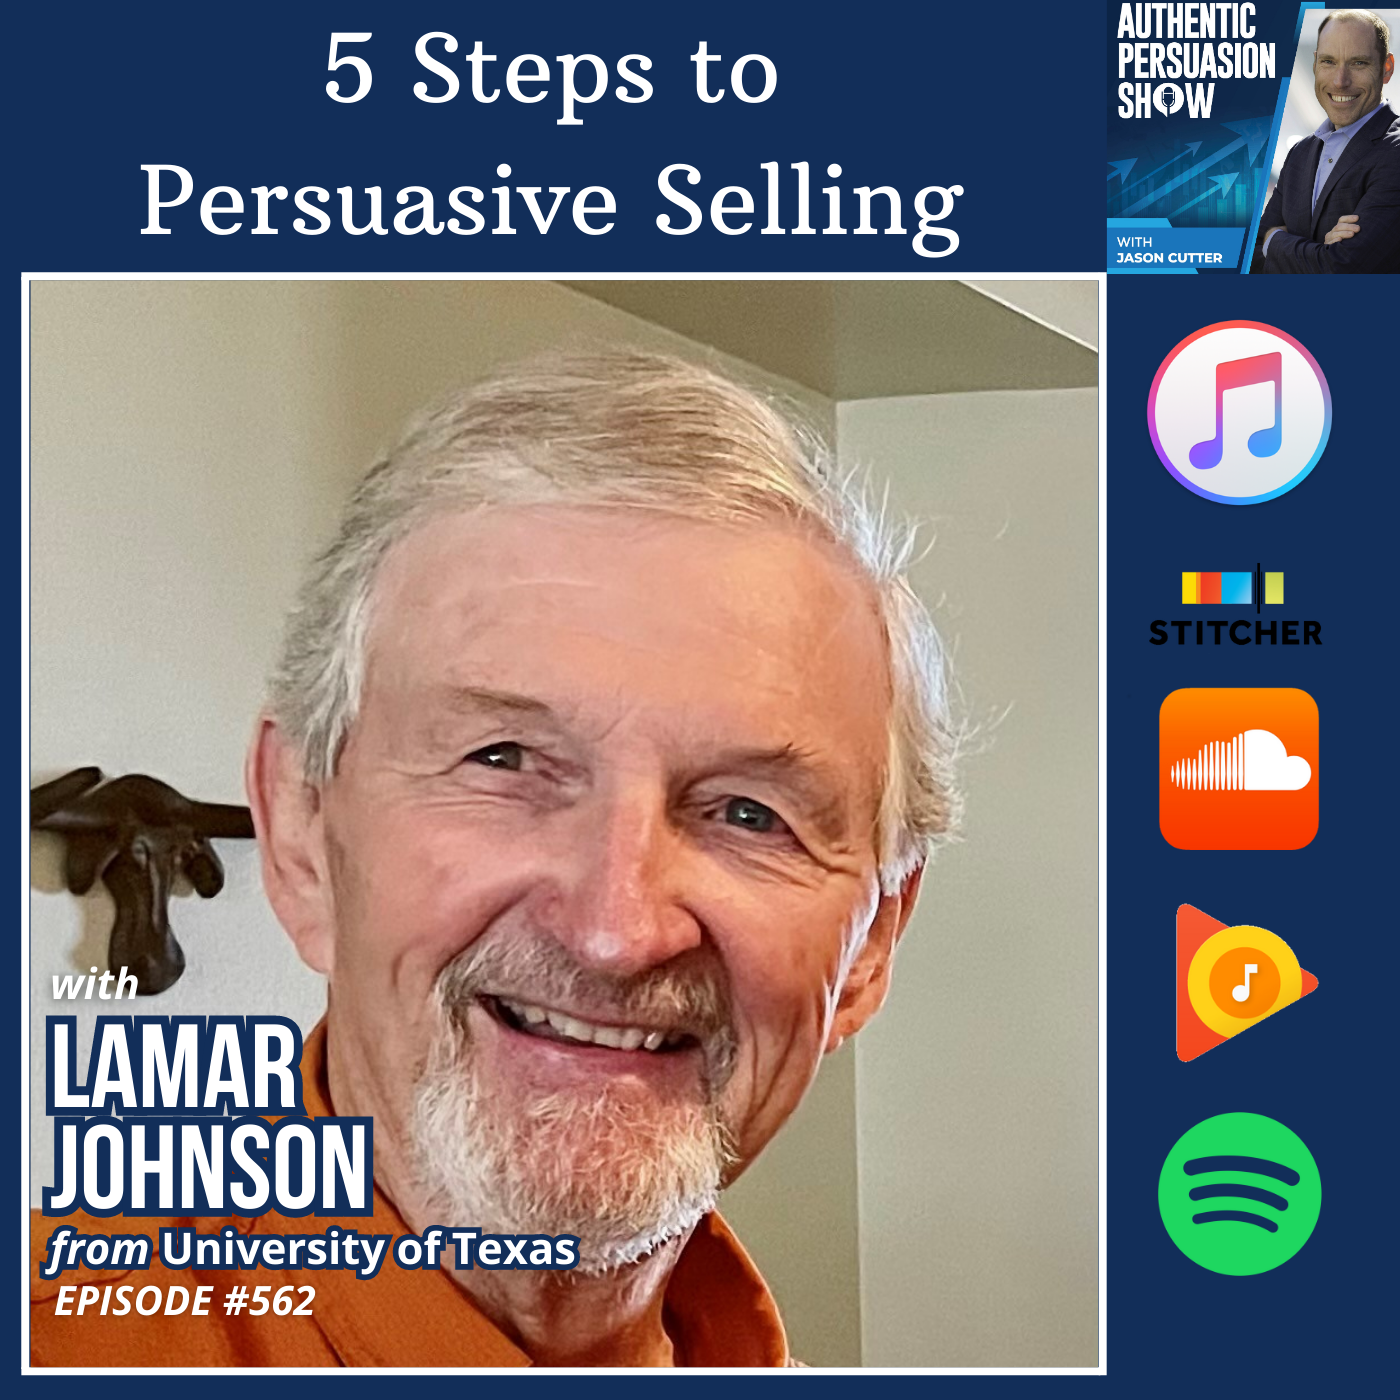 [562] 5 Steps to Persuasive Selling, with Lamar Johnson from University of Texas 